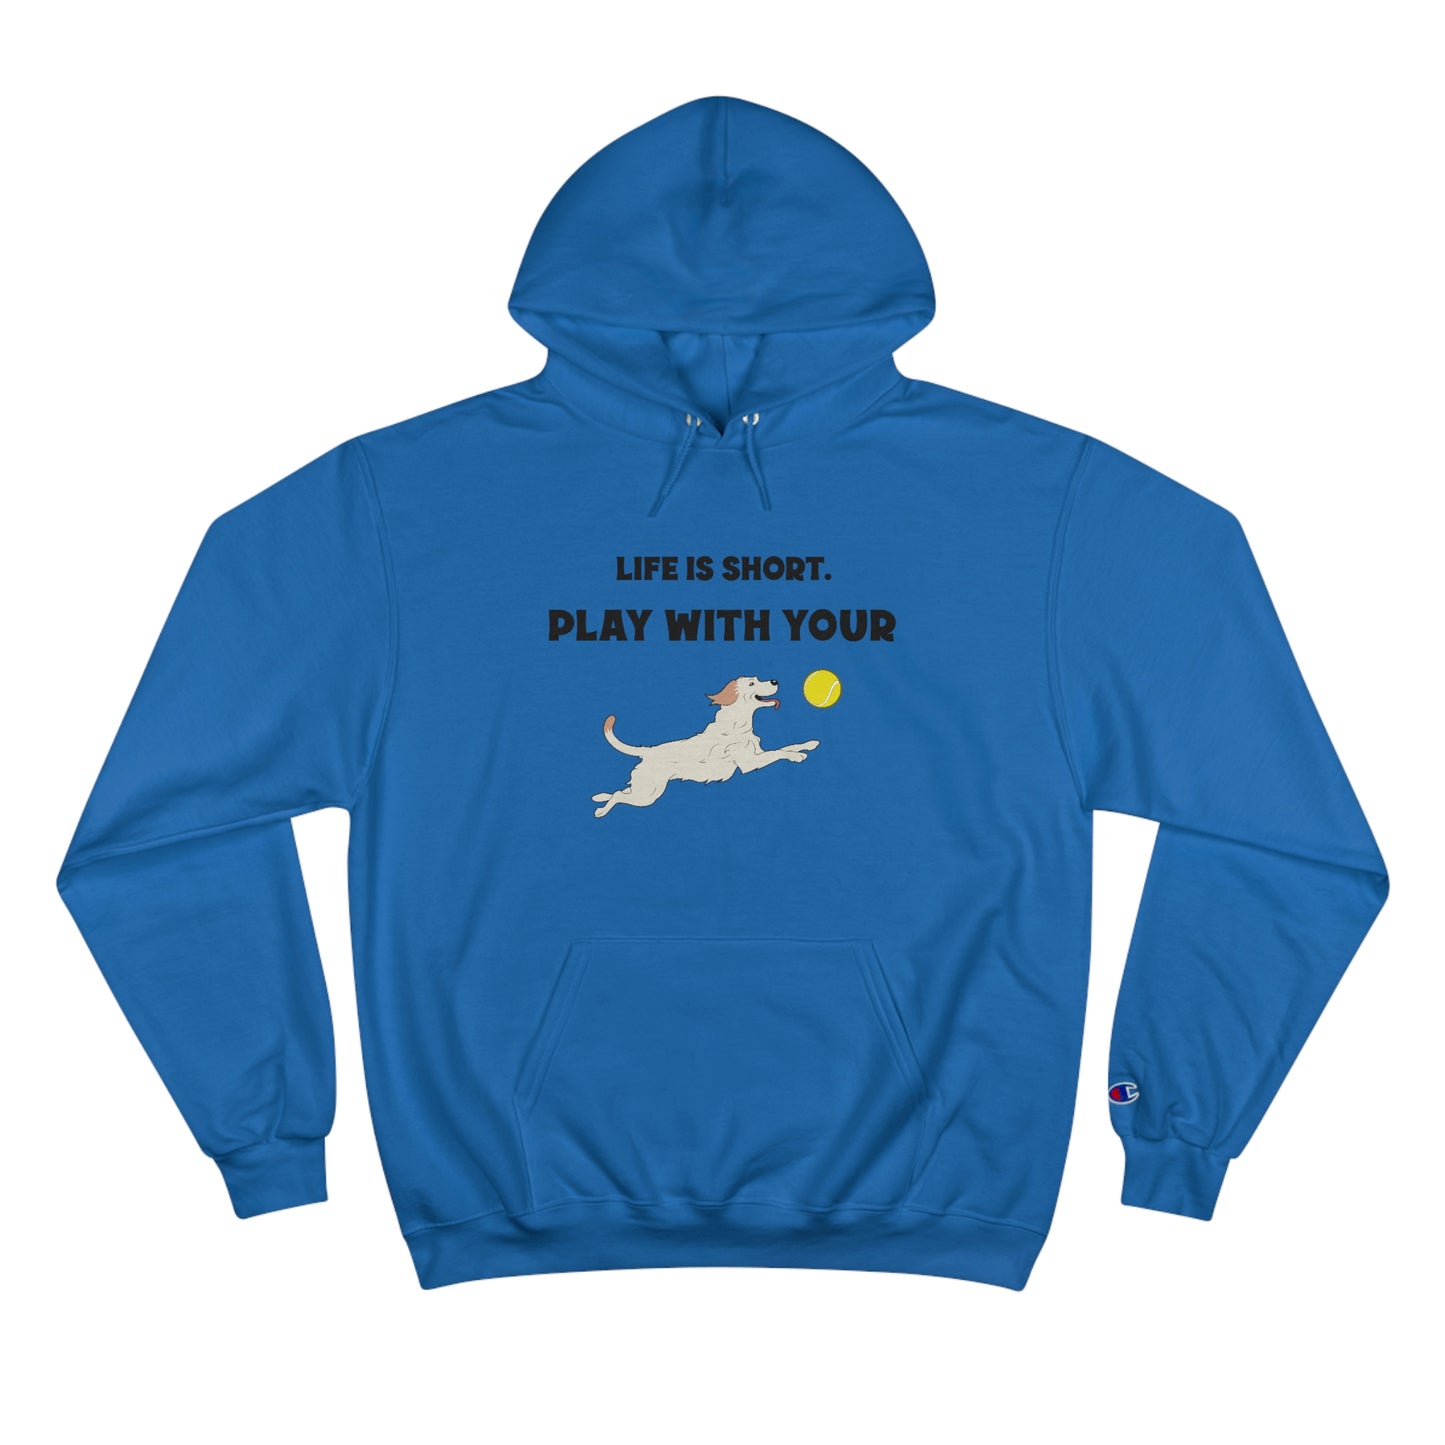 Life is Short, Play with your Dog hoodie - Tortuna